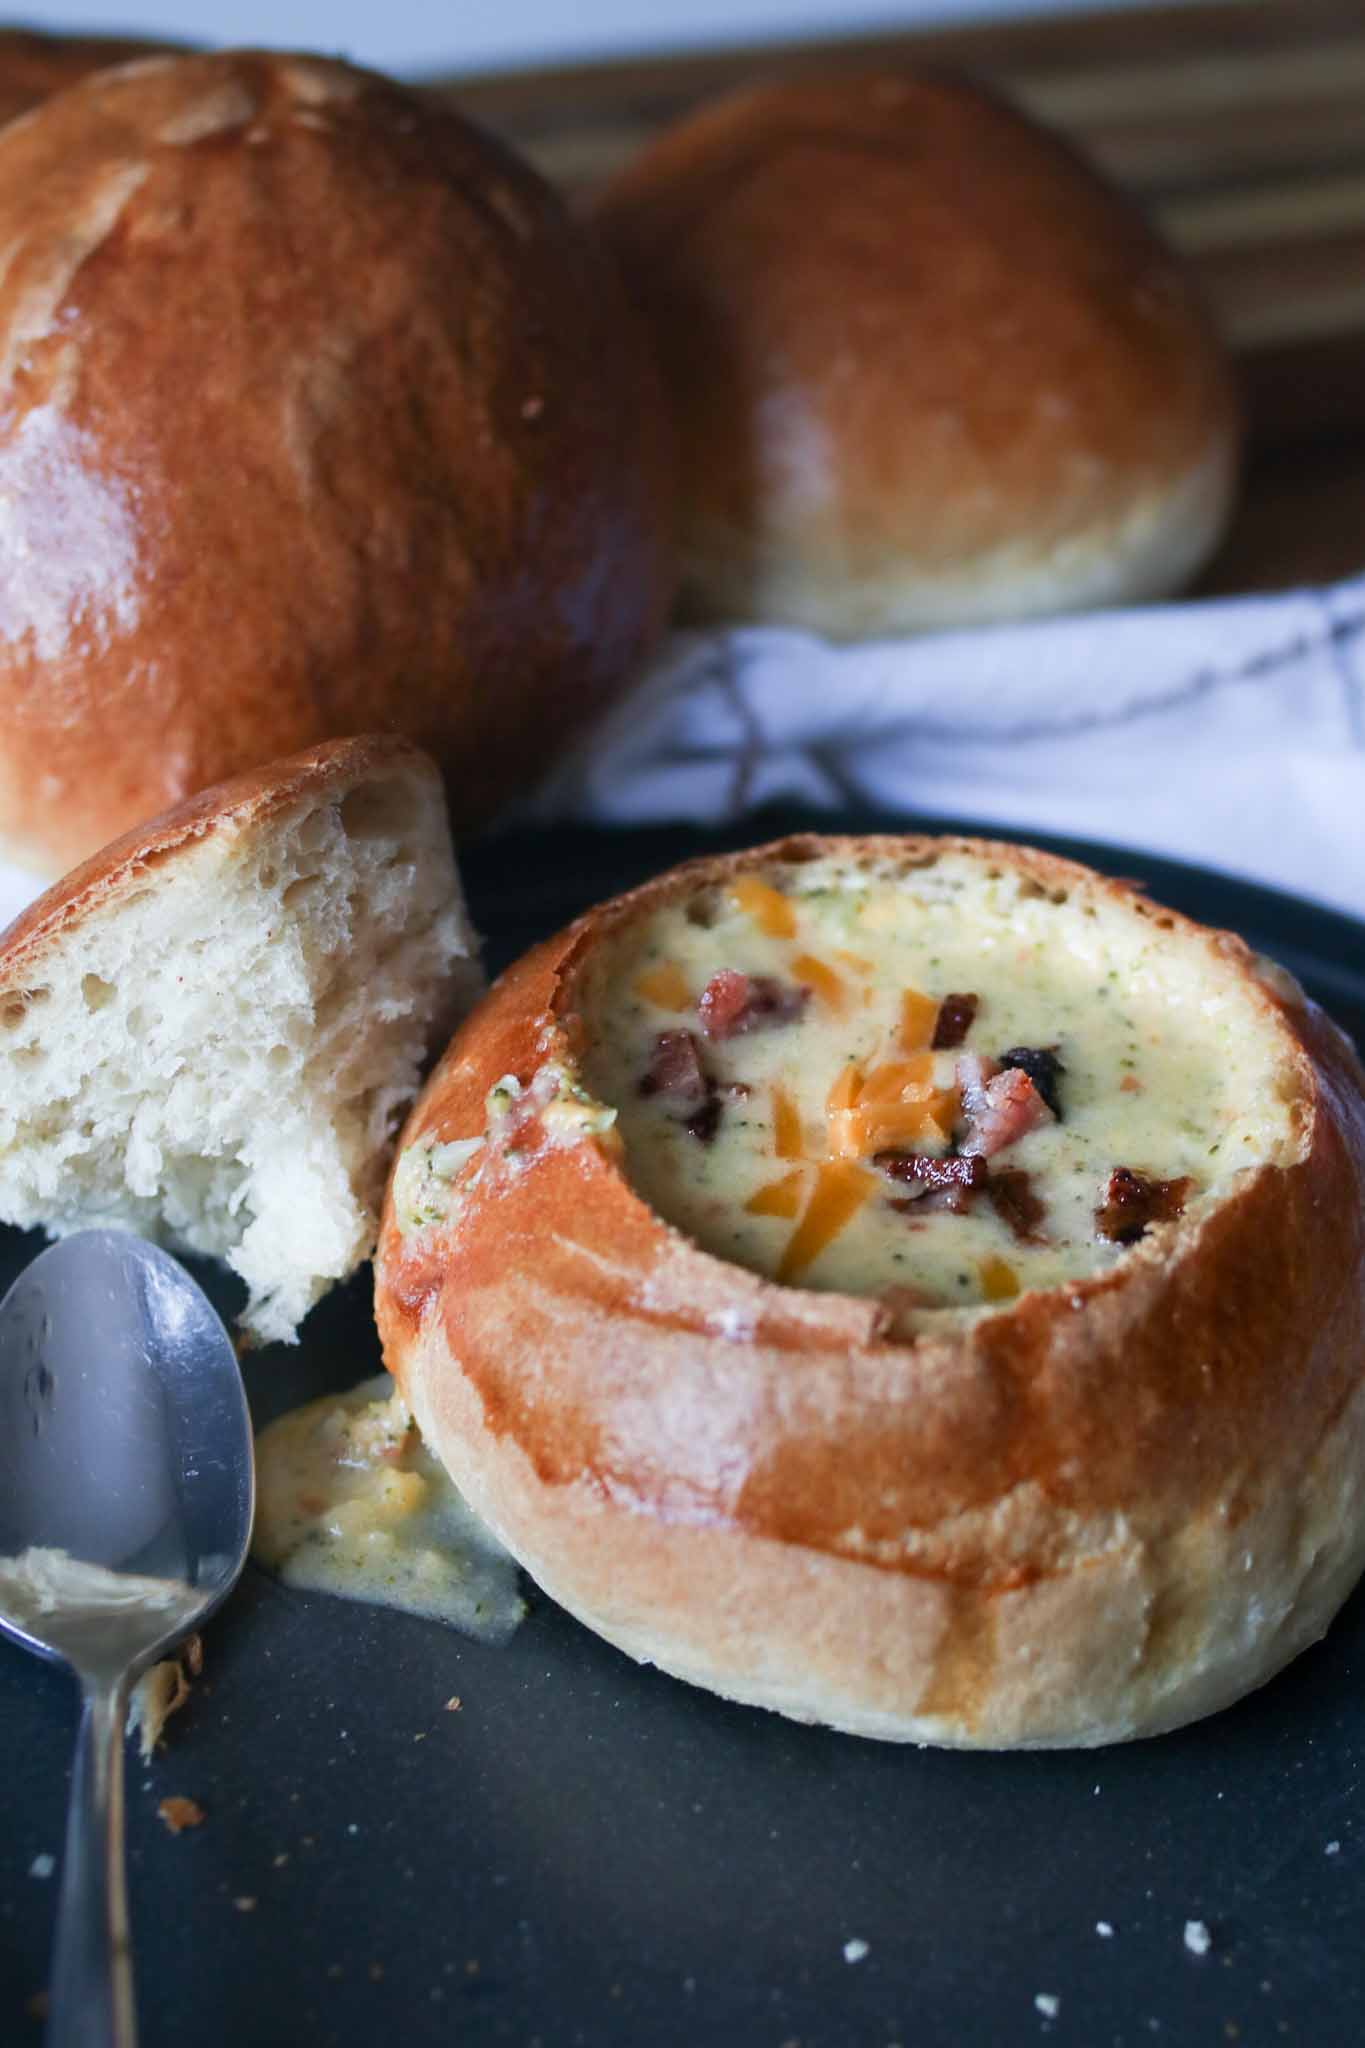 Sourdough Bread Bowls for Soup - Good Things Baking Co